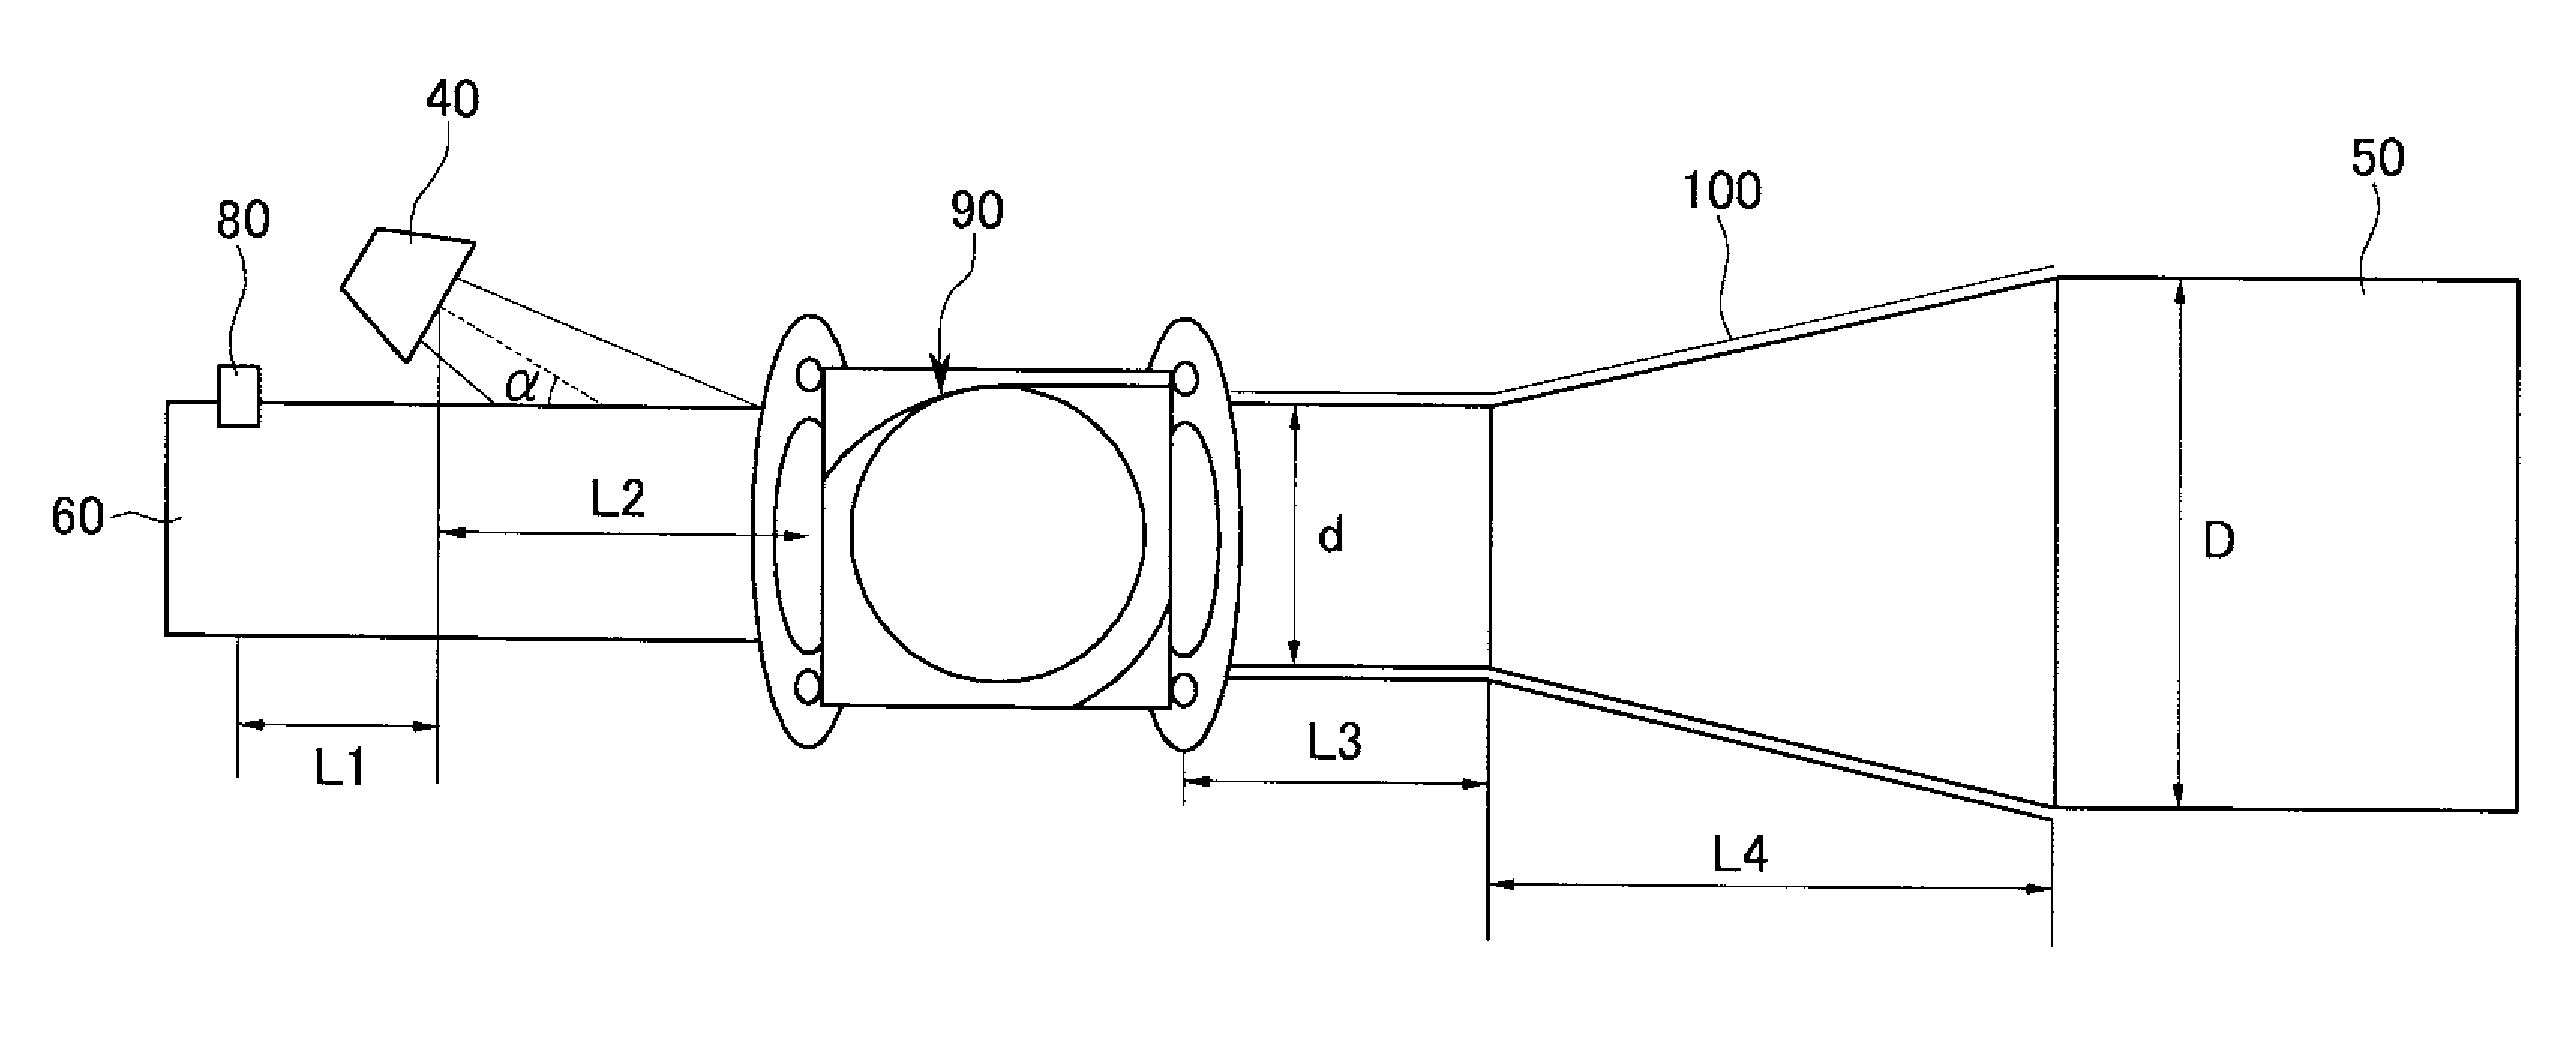 Apparatus for Reducing Nitrogen Oxide in Exhaust Pipe